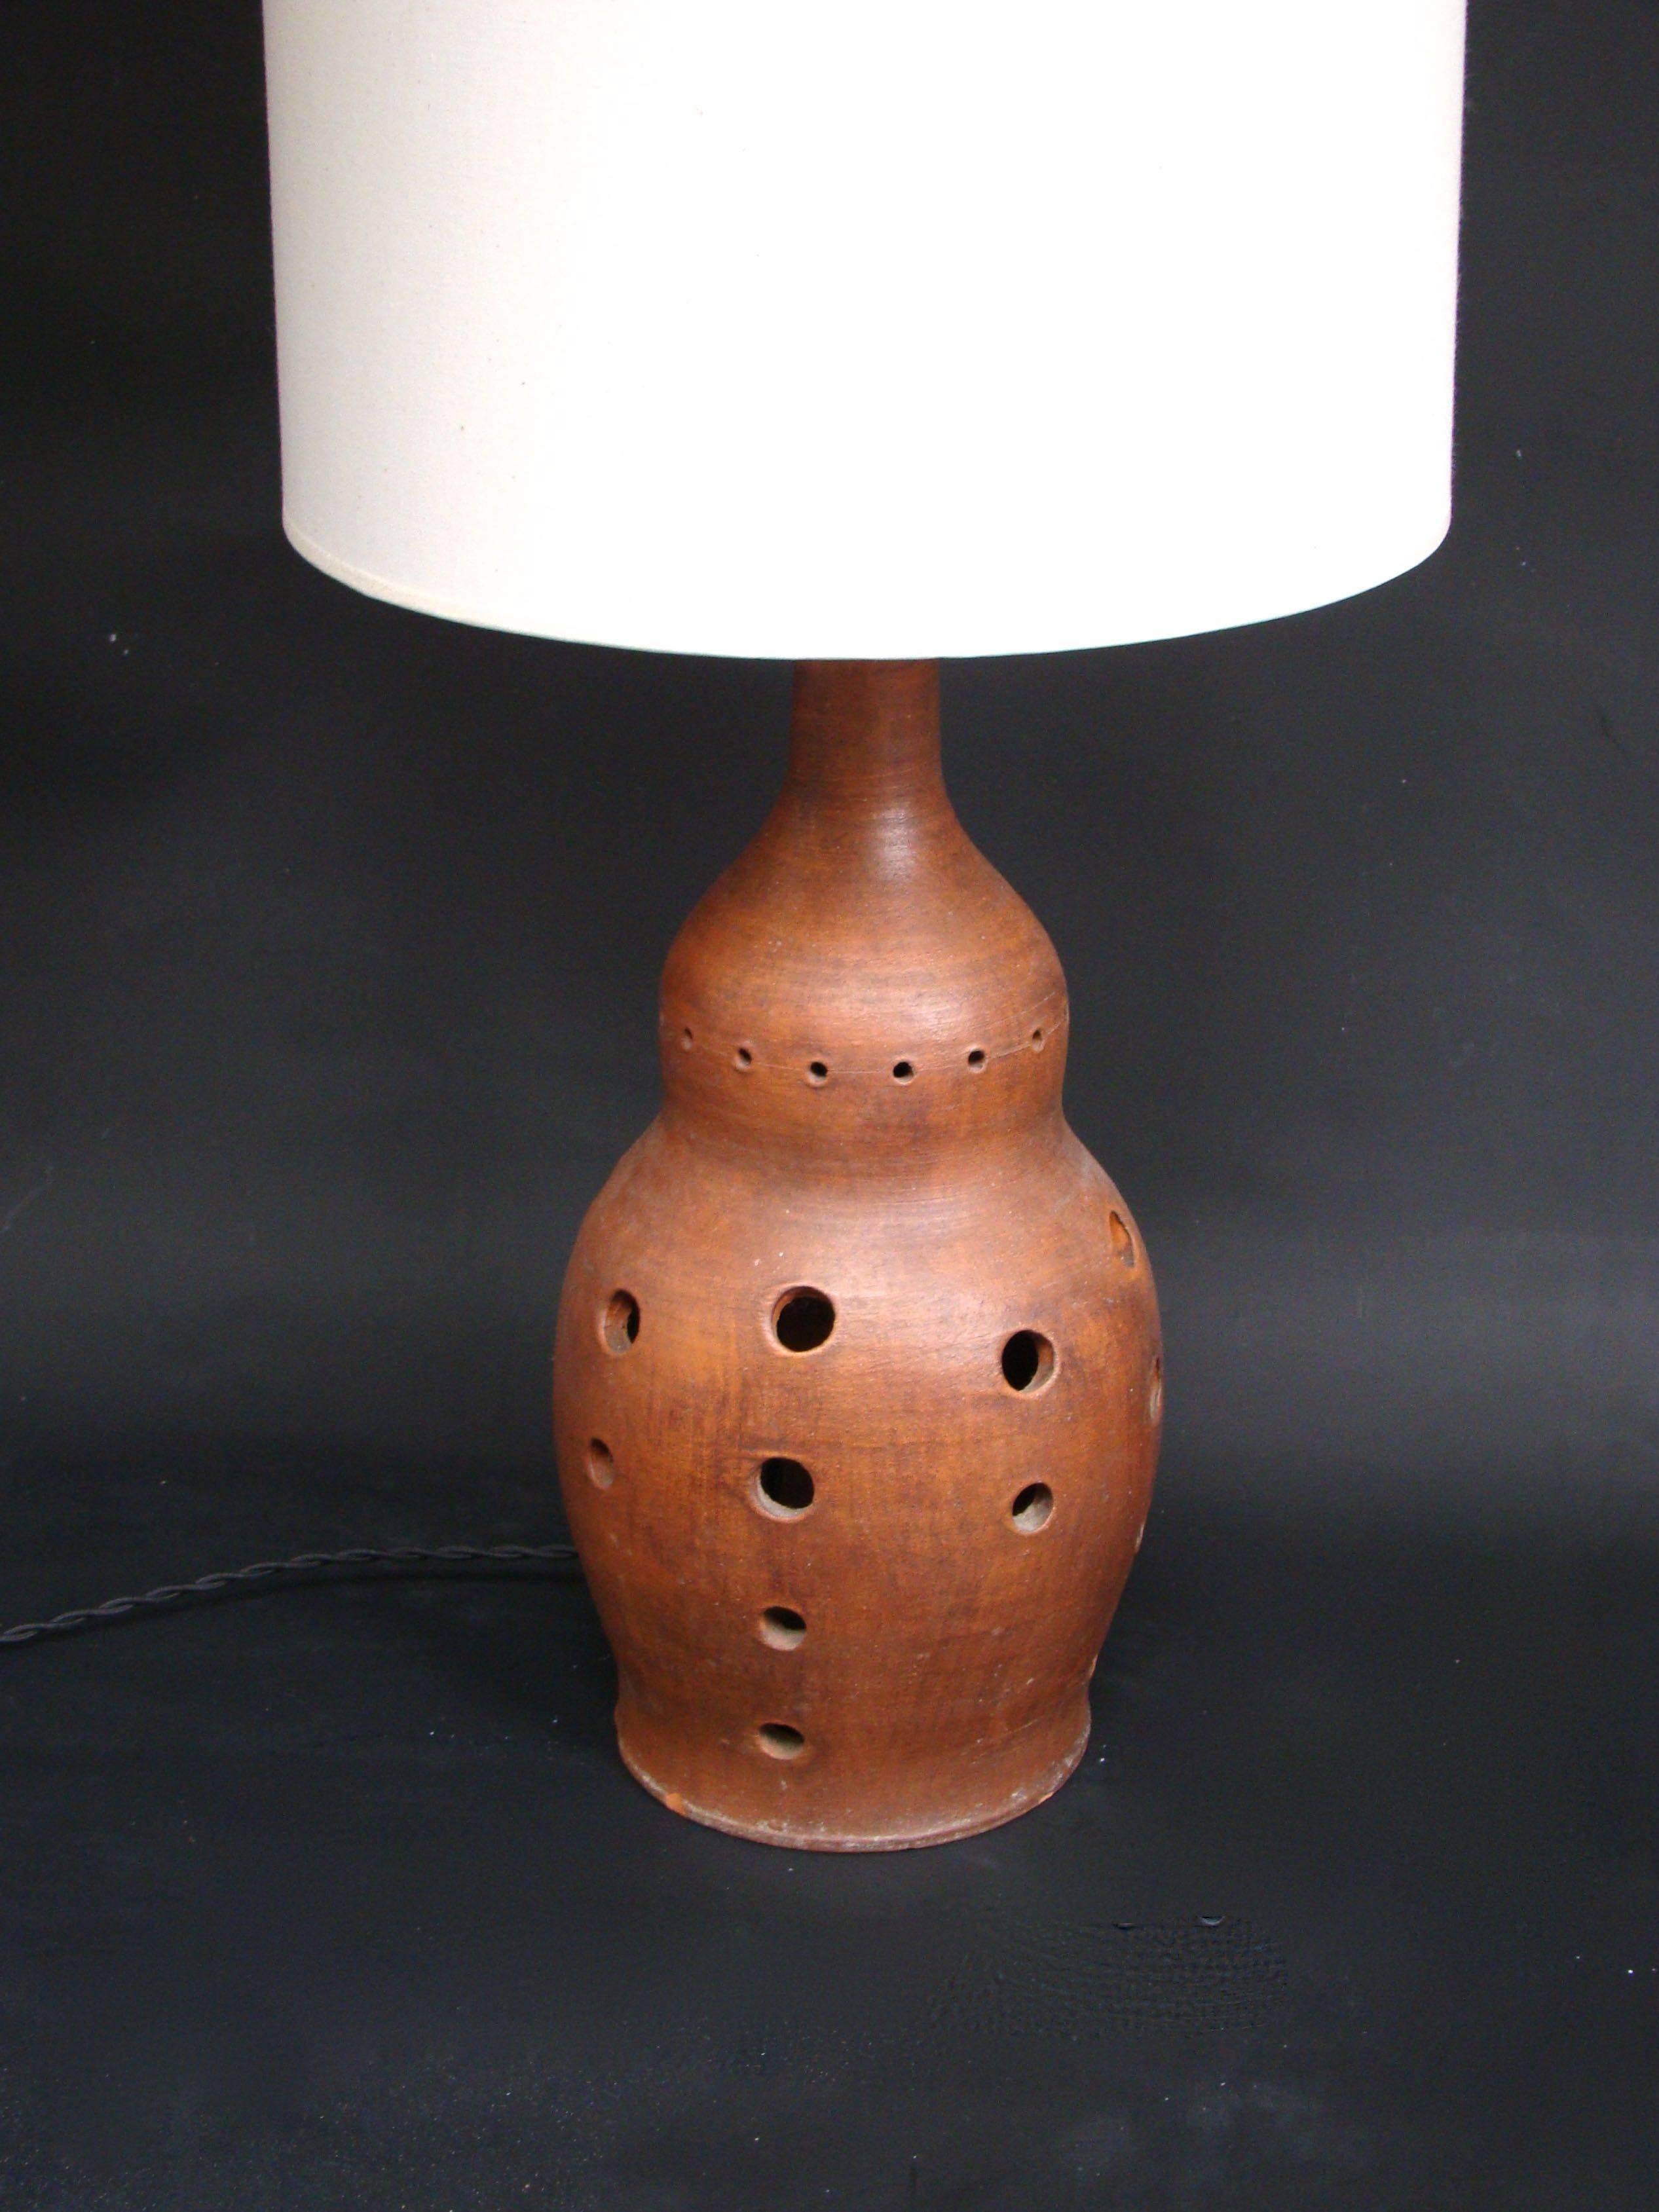 Elegant table lamp in terra cotta figuring a flask shade, circa 1950.

Height: 73 cm with the shade.